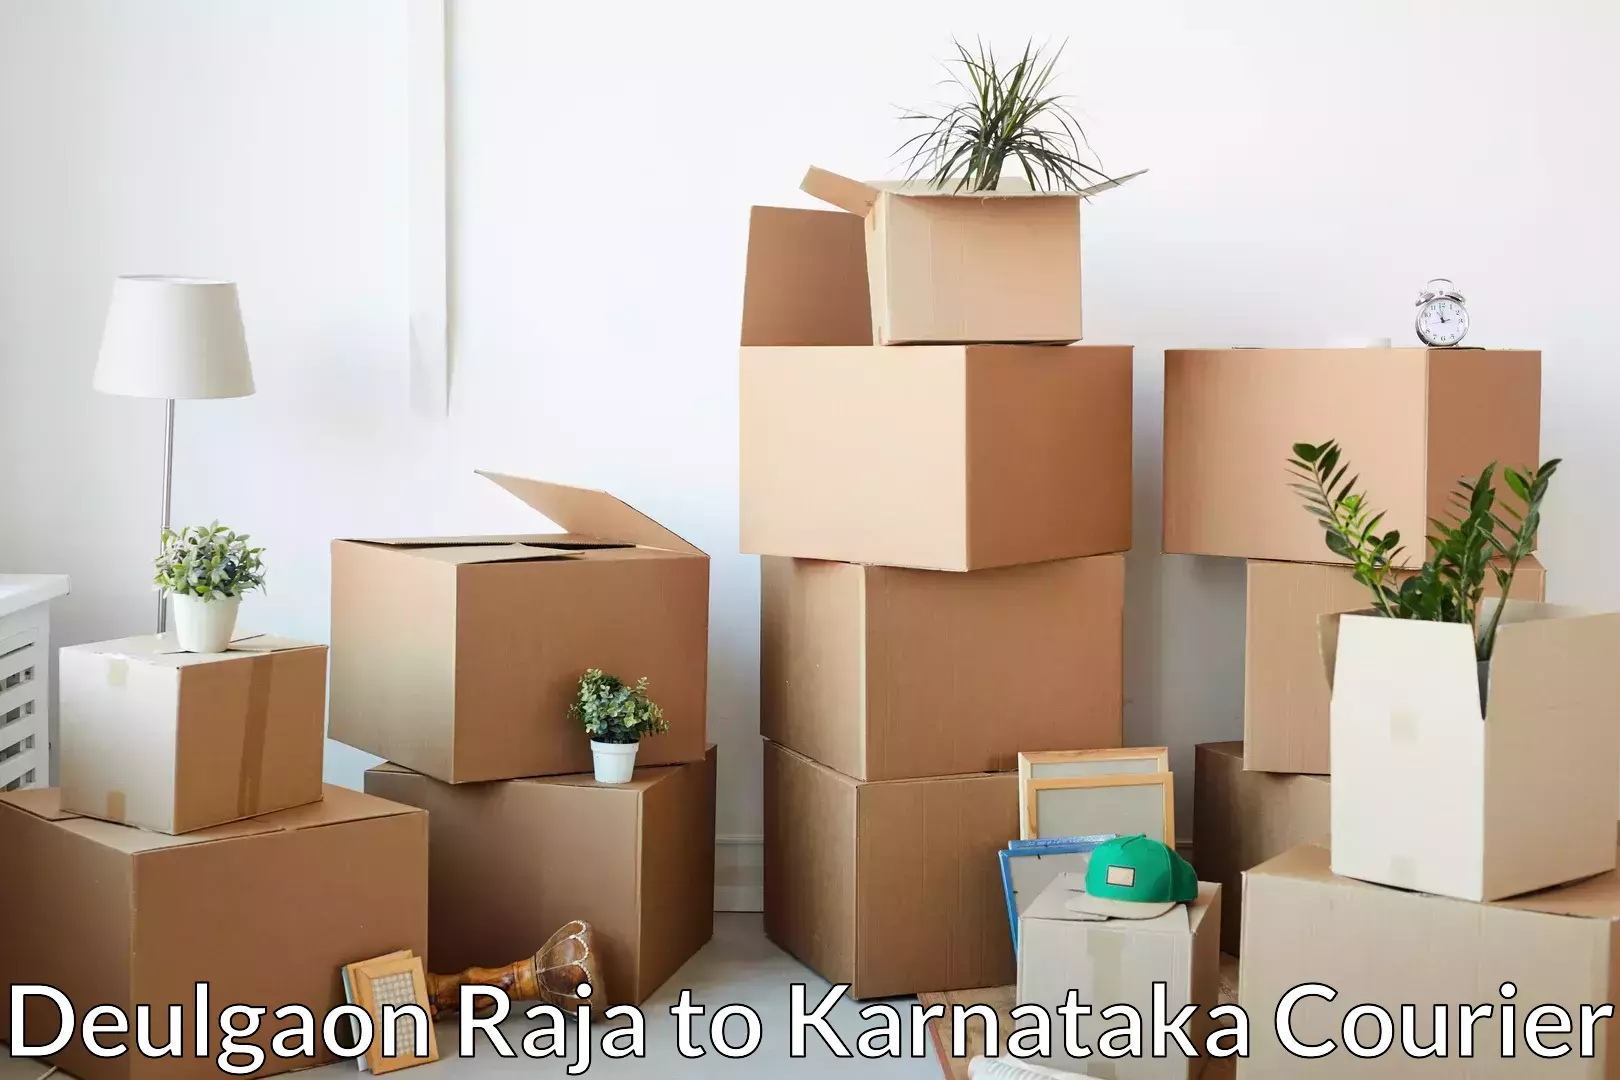 Comprehensive relocation services Deulgaon Raja to Athani